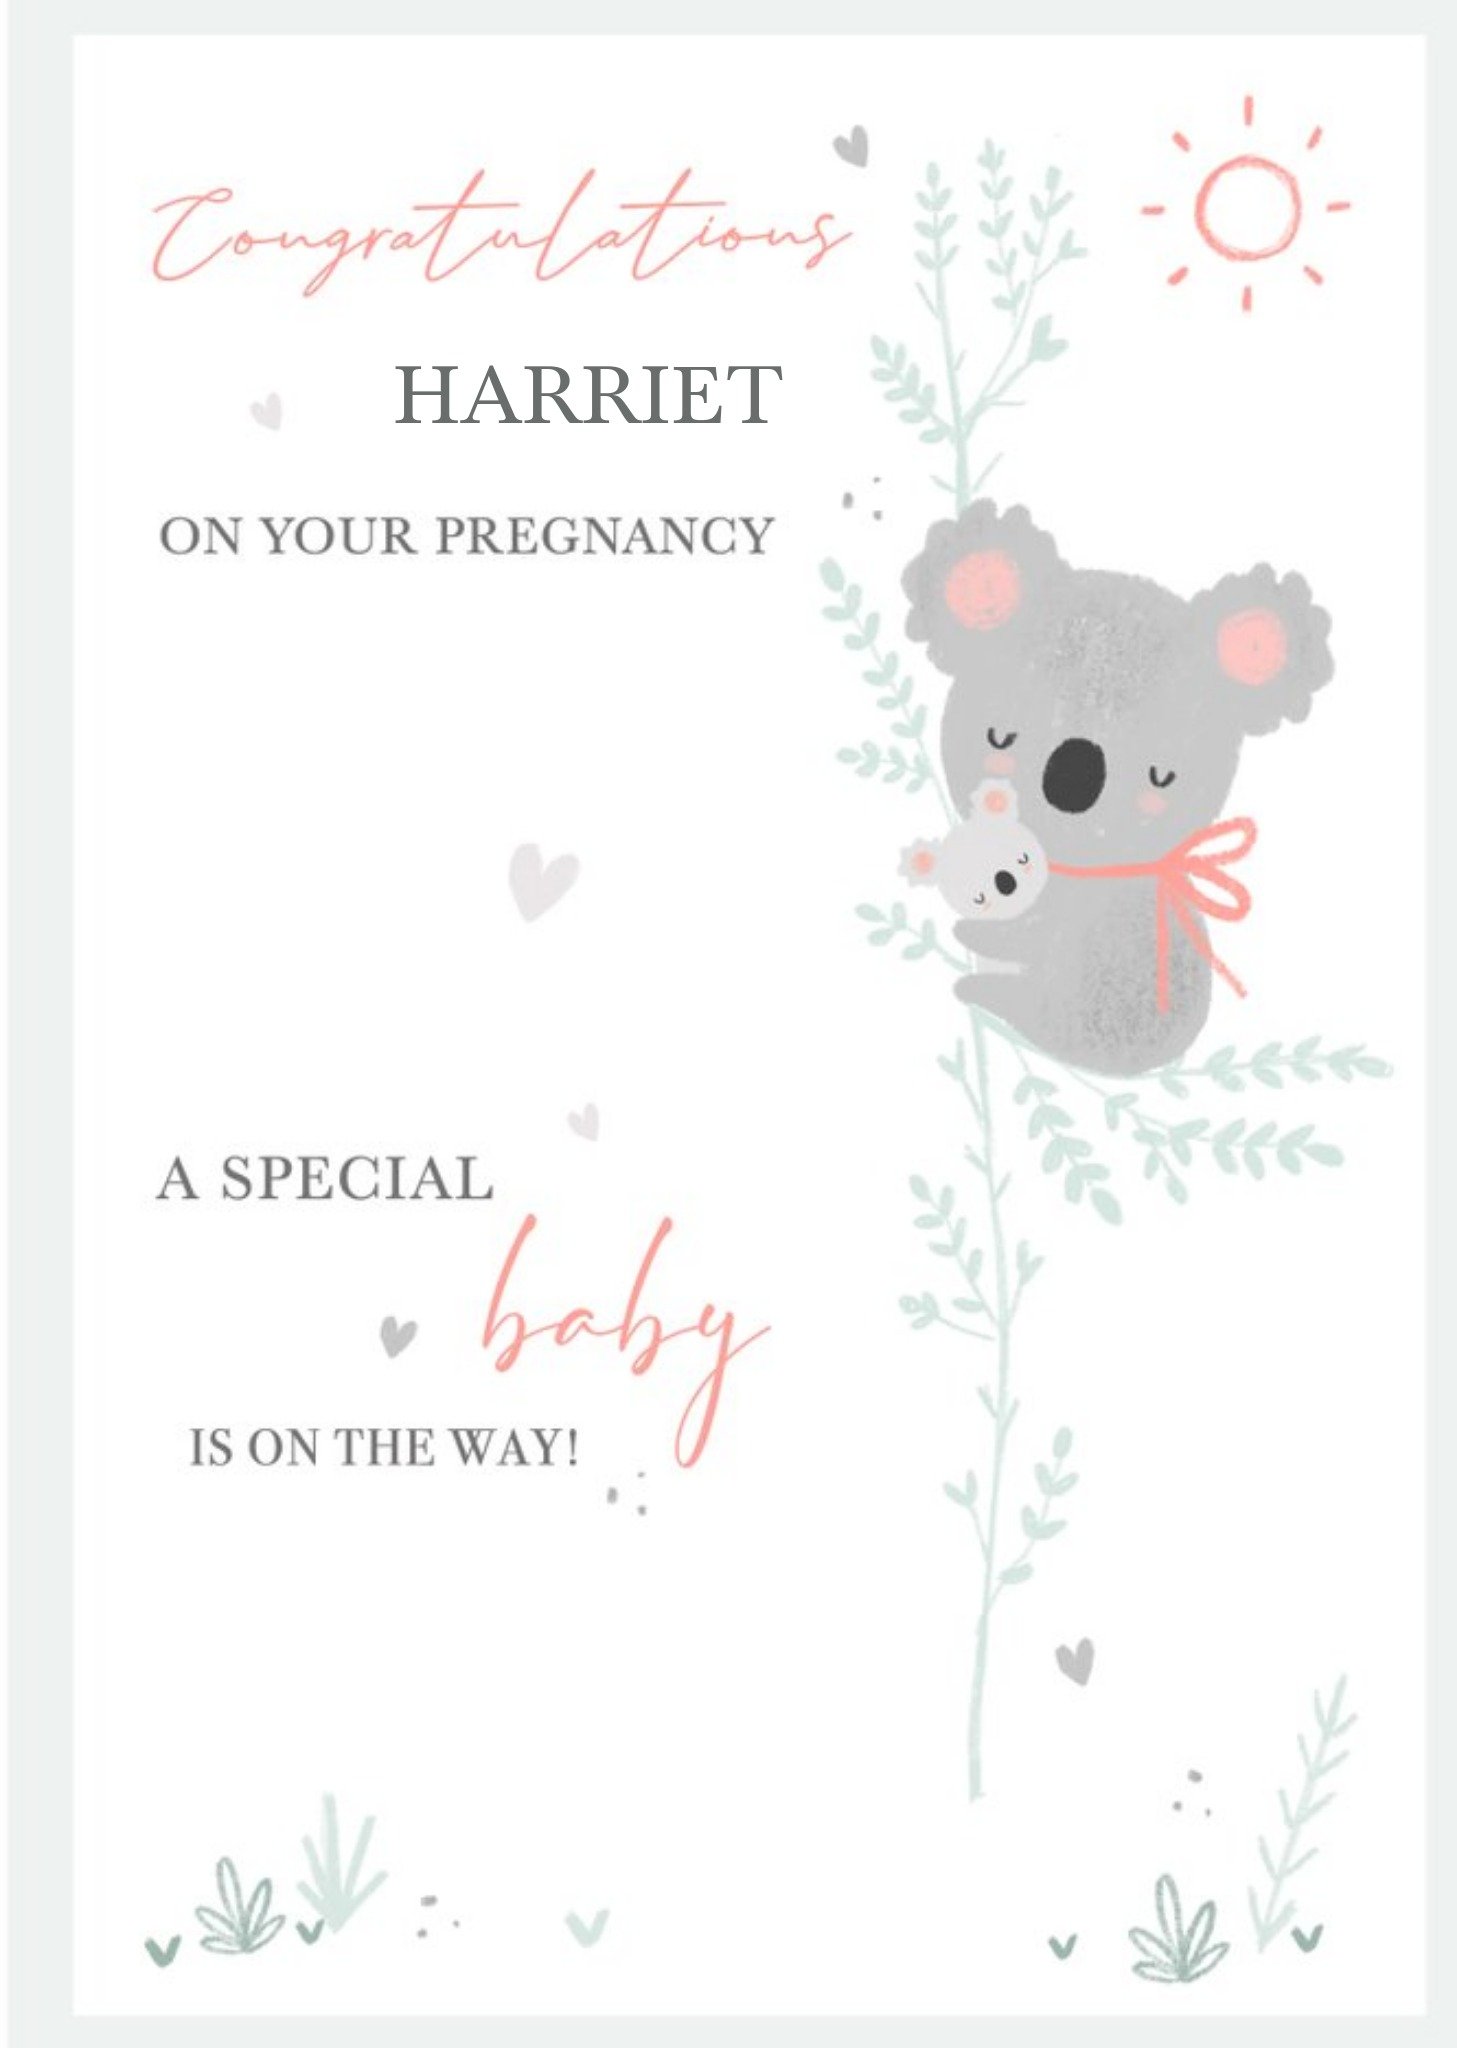 Moonpig Illustration Of A Koala With A Joey Perched In A Tree On Your Pregnancy Congratulations Card